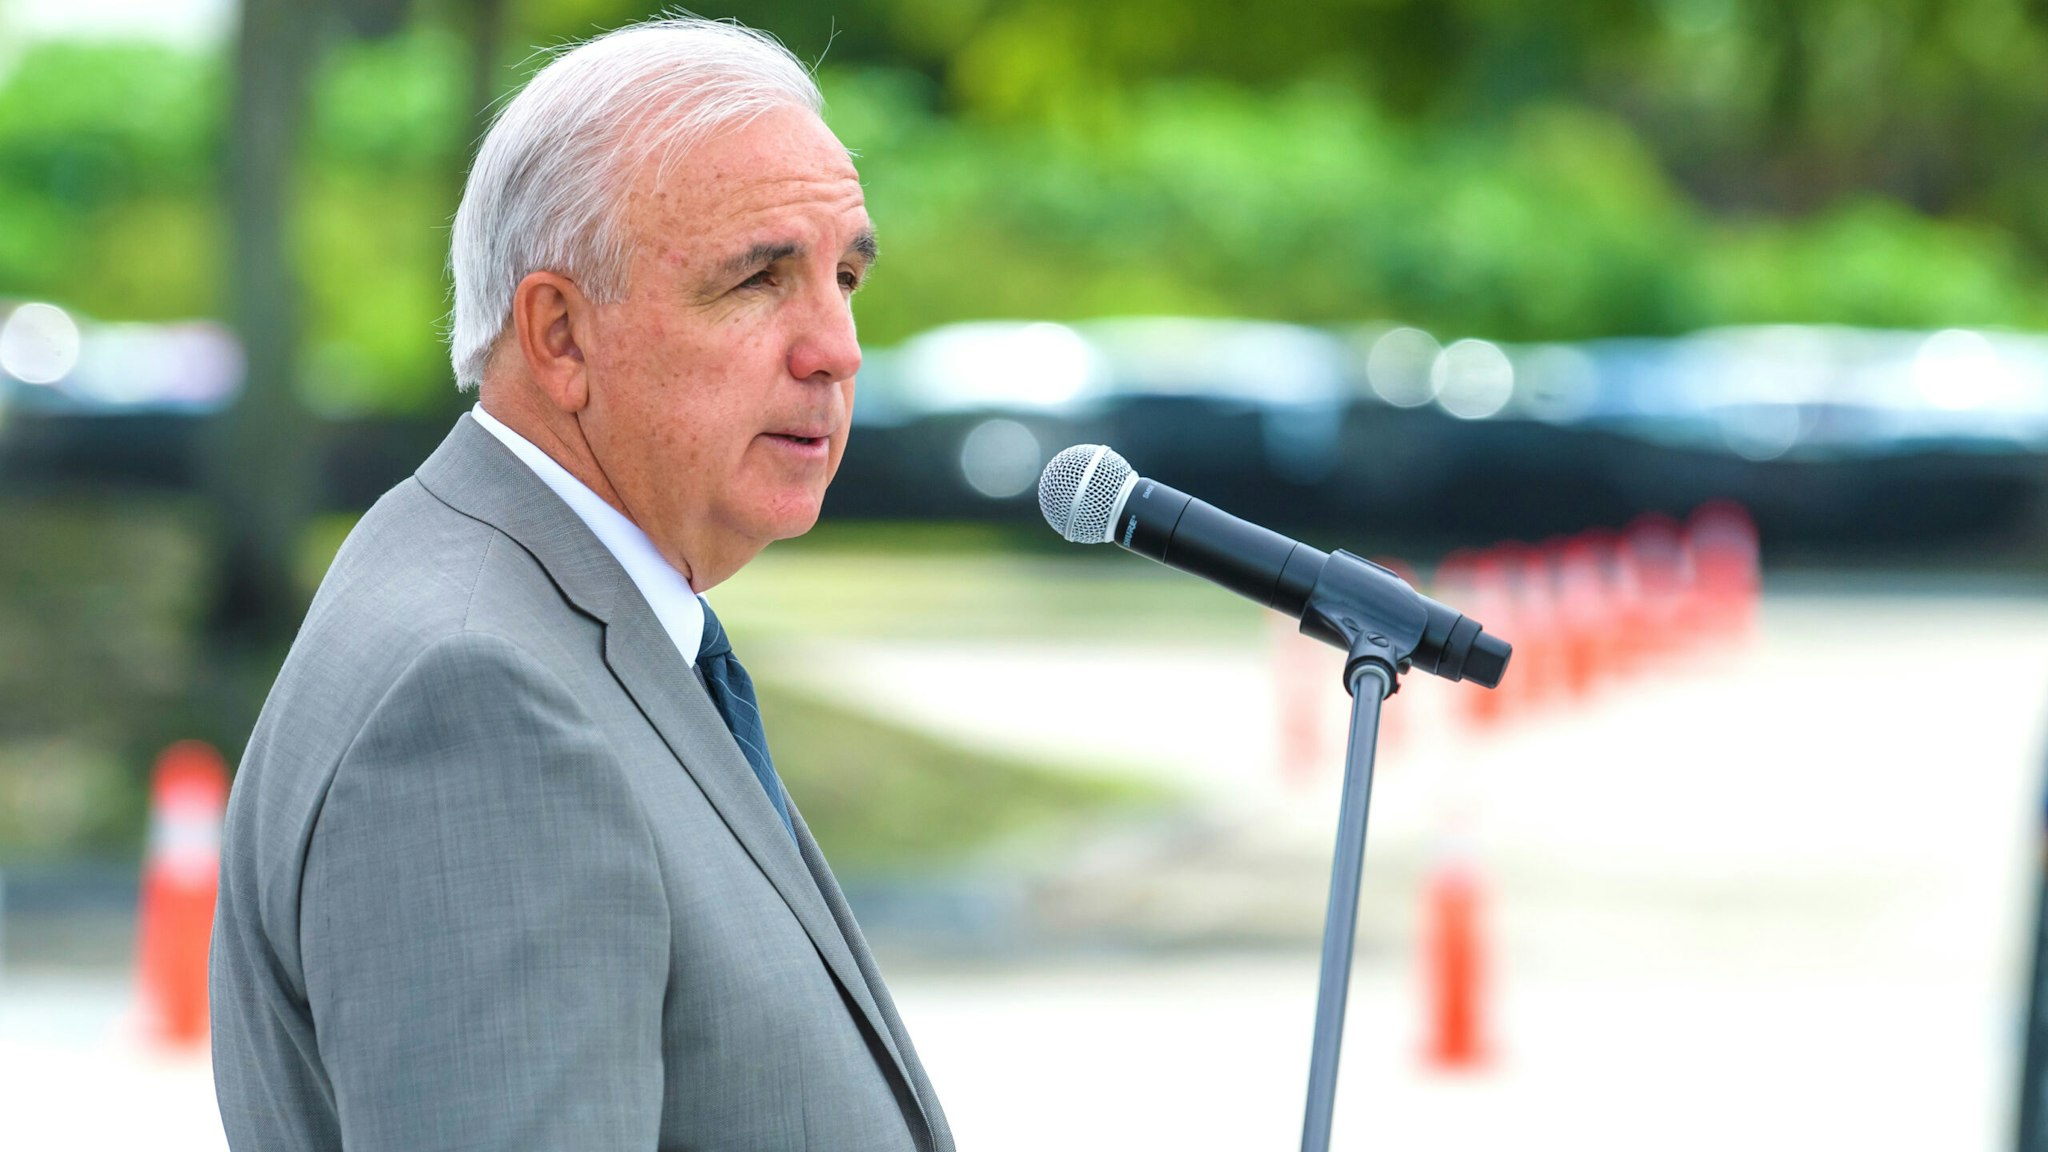 DORAL, FL - JUNE 18: Miami-Dade County Mayor Carlos A. Gimenez speaks during BioReference Laboratories hosts Grand Opening of COVID-19 (Coronavirus) Antibody Testing Collection Event at the Miami International Mall with local Government Officials providing opening remarks on June 18, 2020 in Doral, Florida